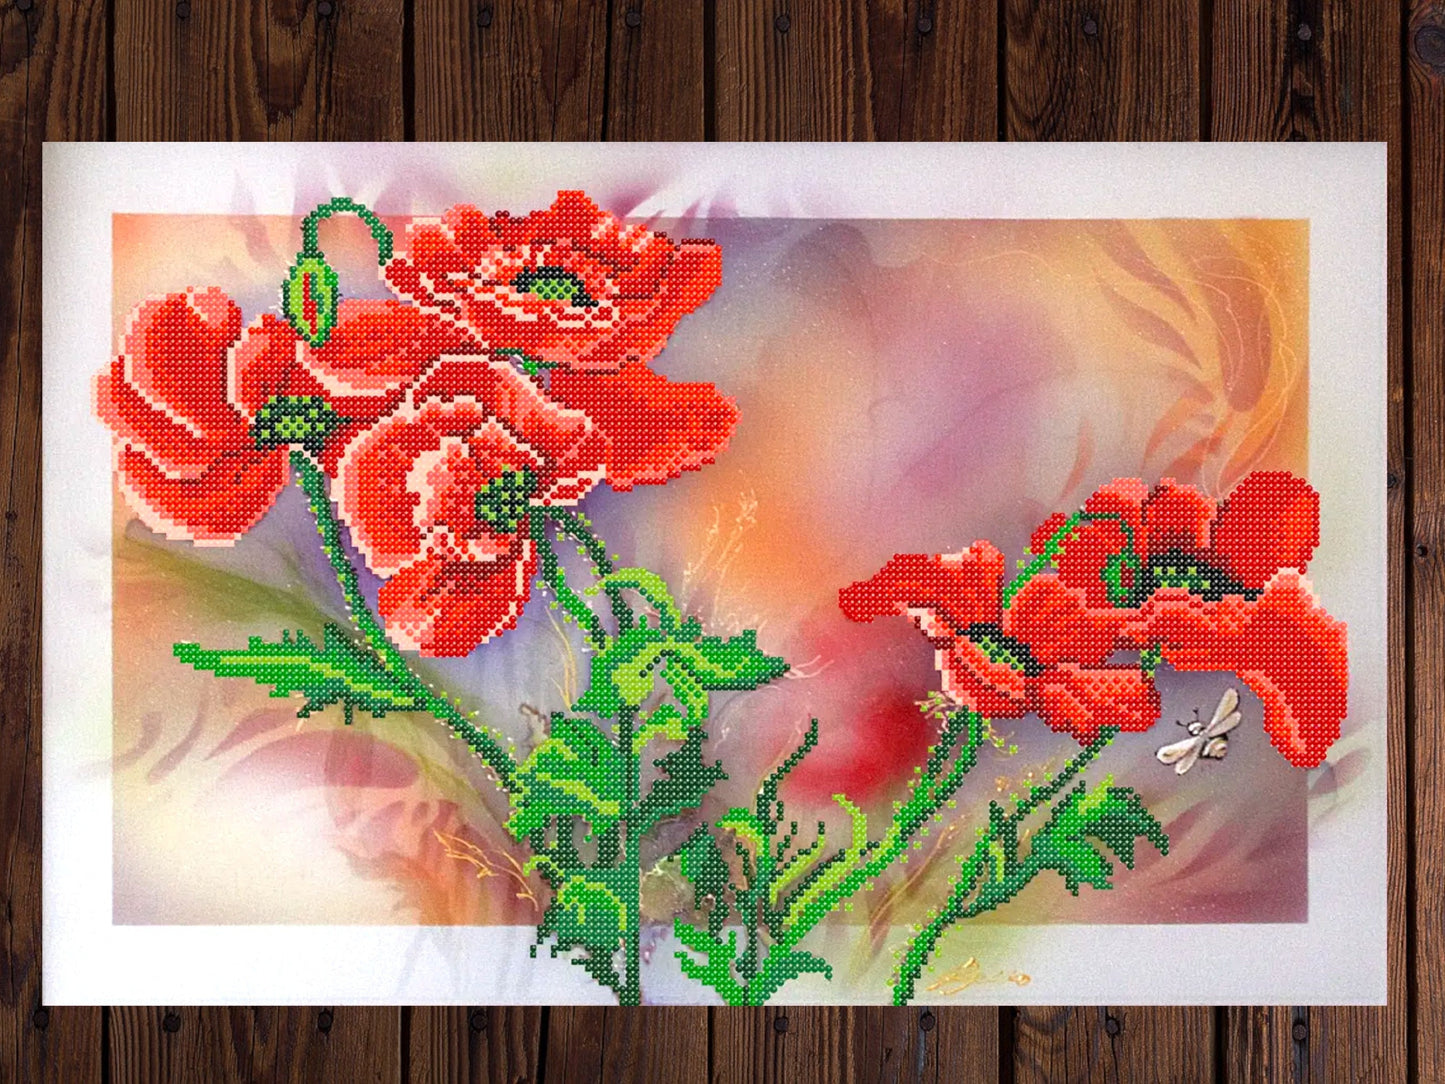 Creative Crafting: DIY Bead Embroidery Kit featuring Red Poppies - VadymShop